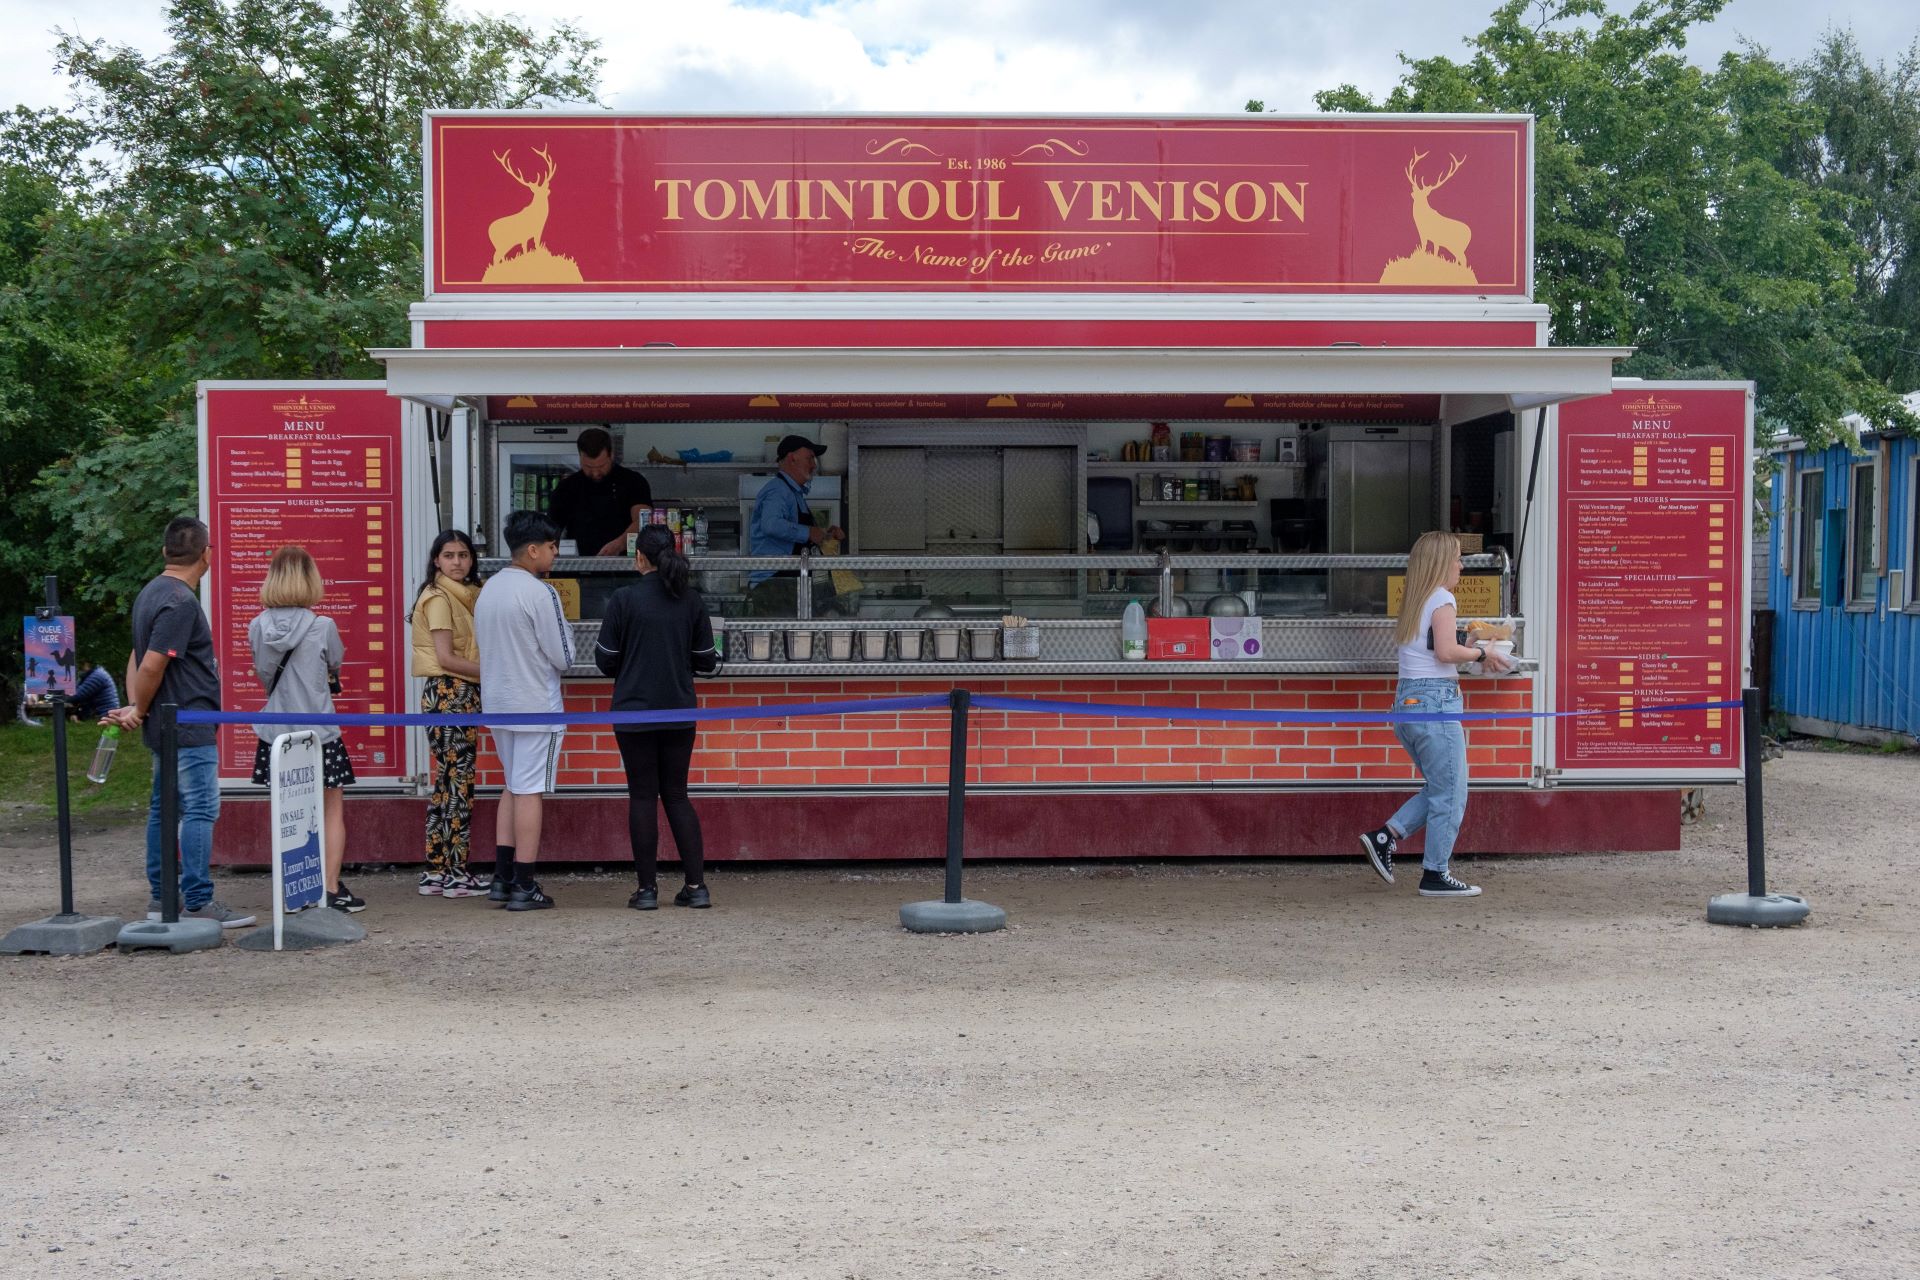 Tomintoul venison kiosk with a queue of customers waiting to be served IMAGE: Robin Mair 2022